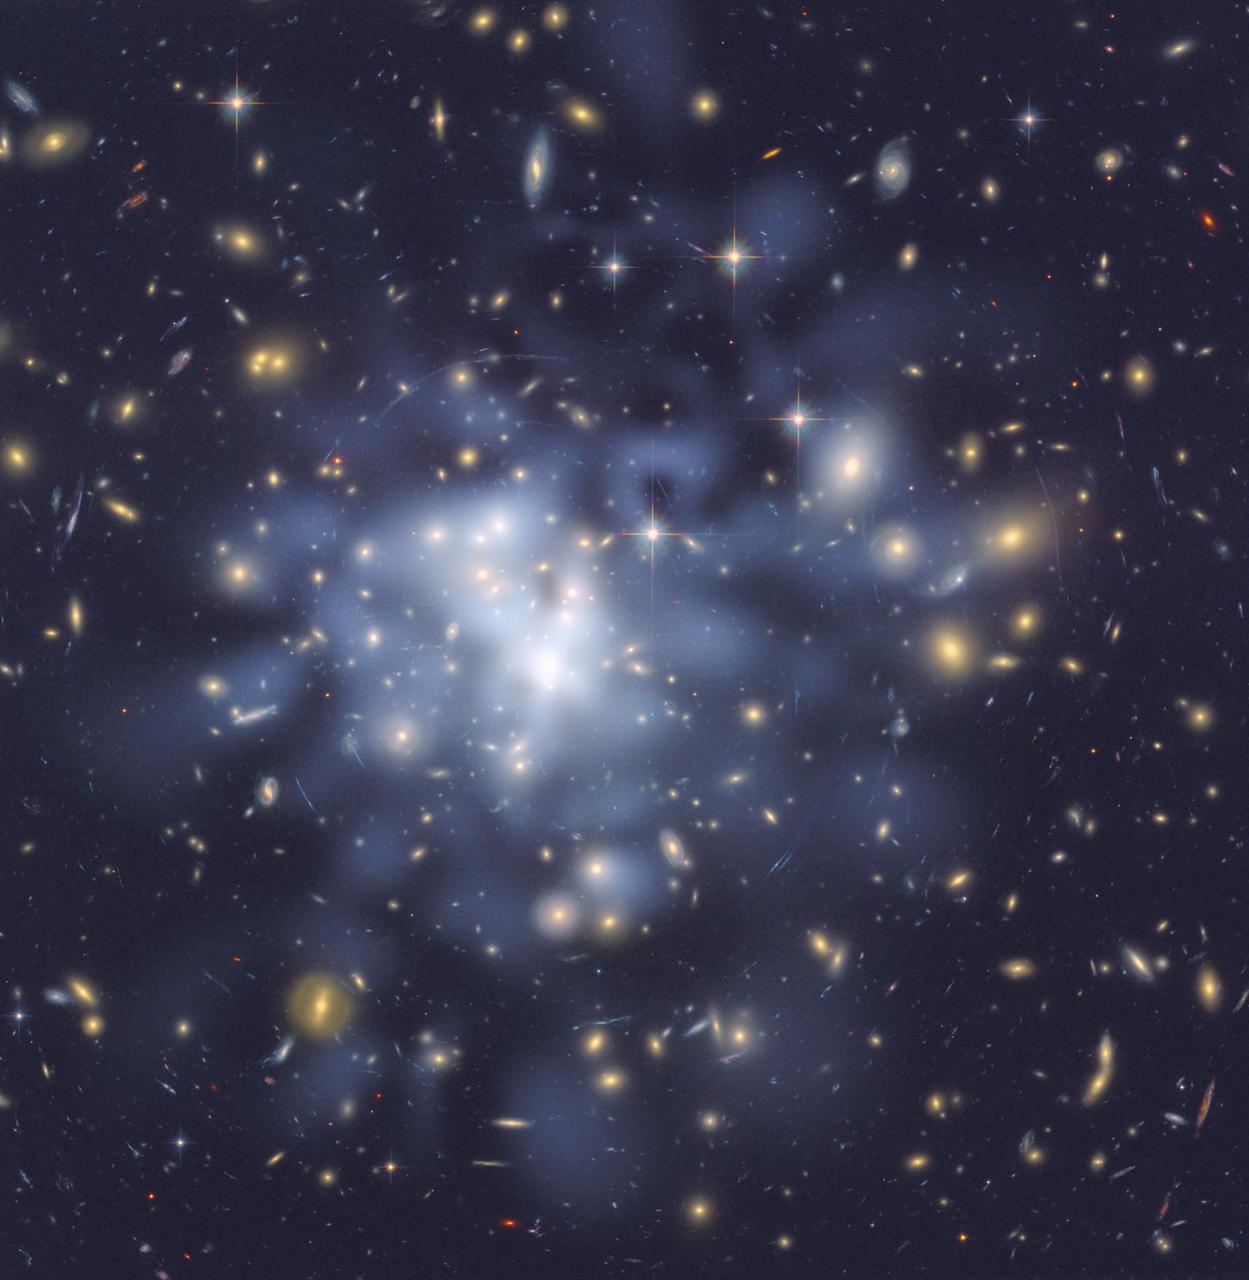 This Hubble Space Telescope composite image shows a ghostly "ring" of dark matter in the galaxy cluster